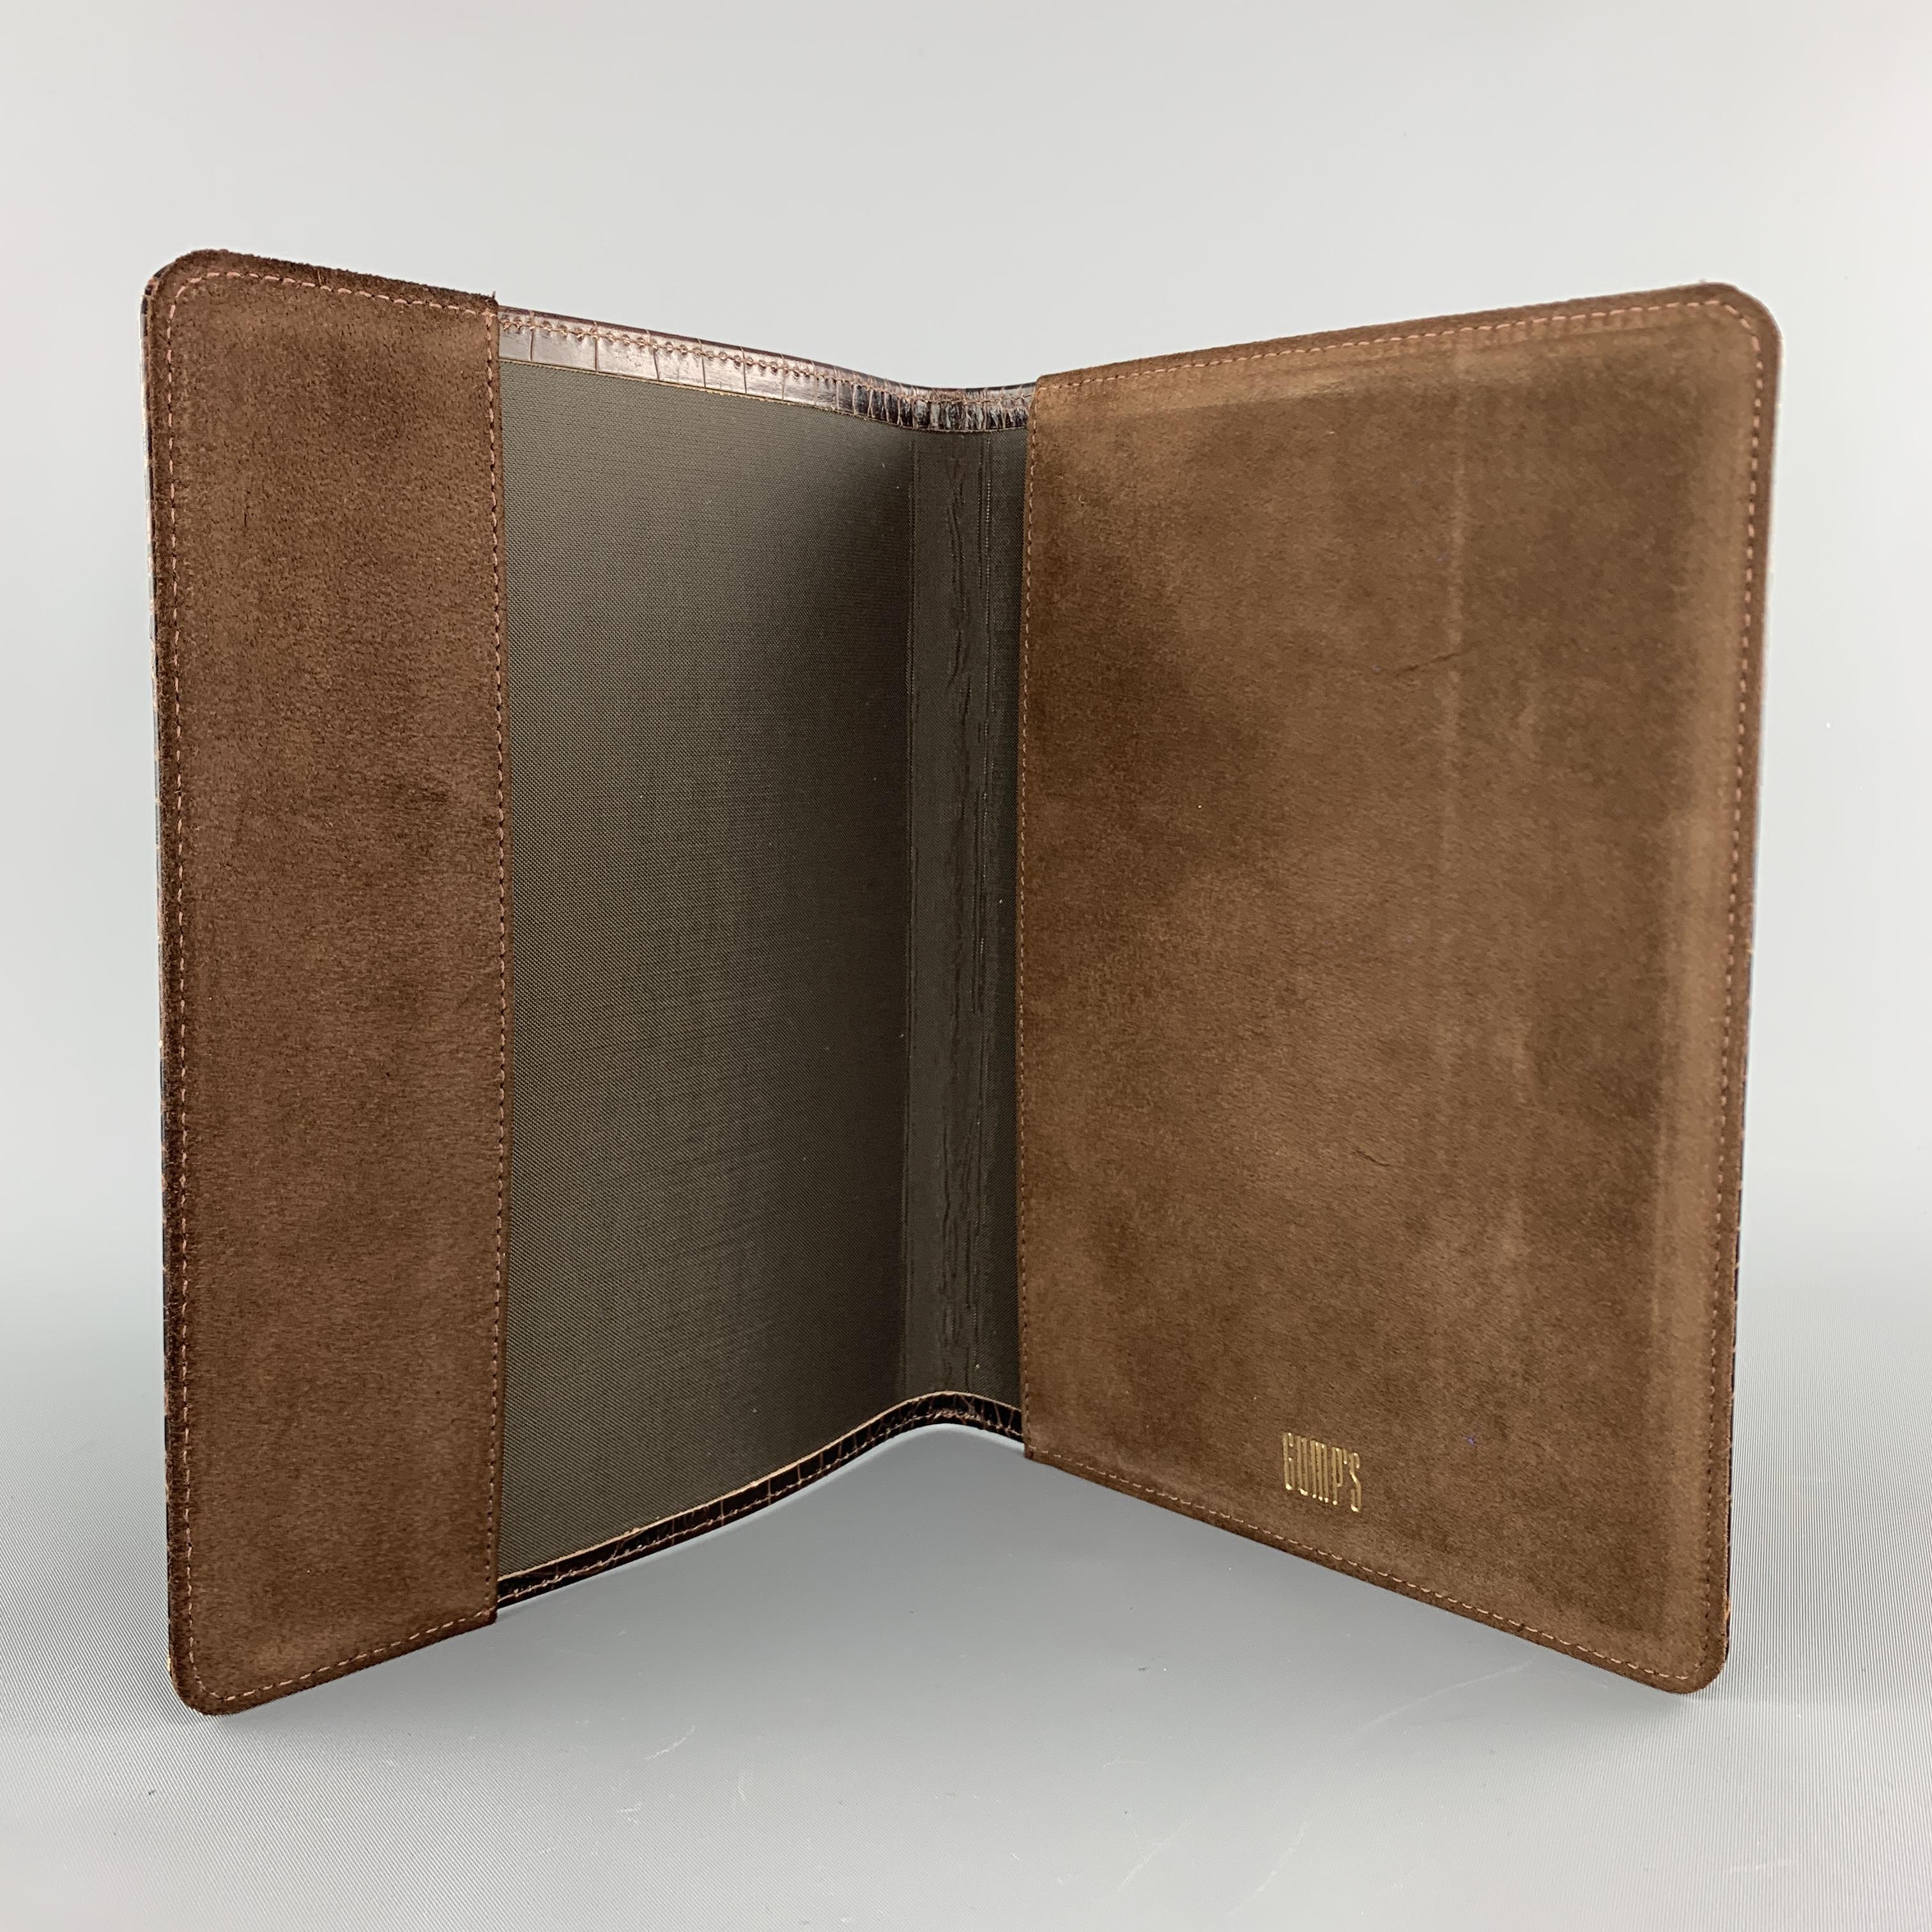 Black GUMP'S Embossed Brown Leather Book Case / Writing Folder